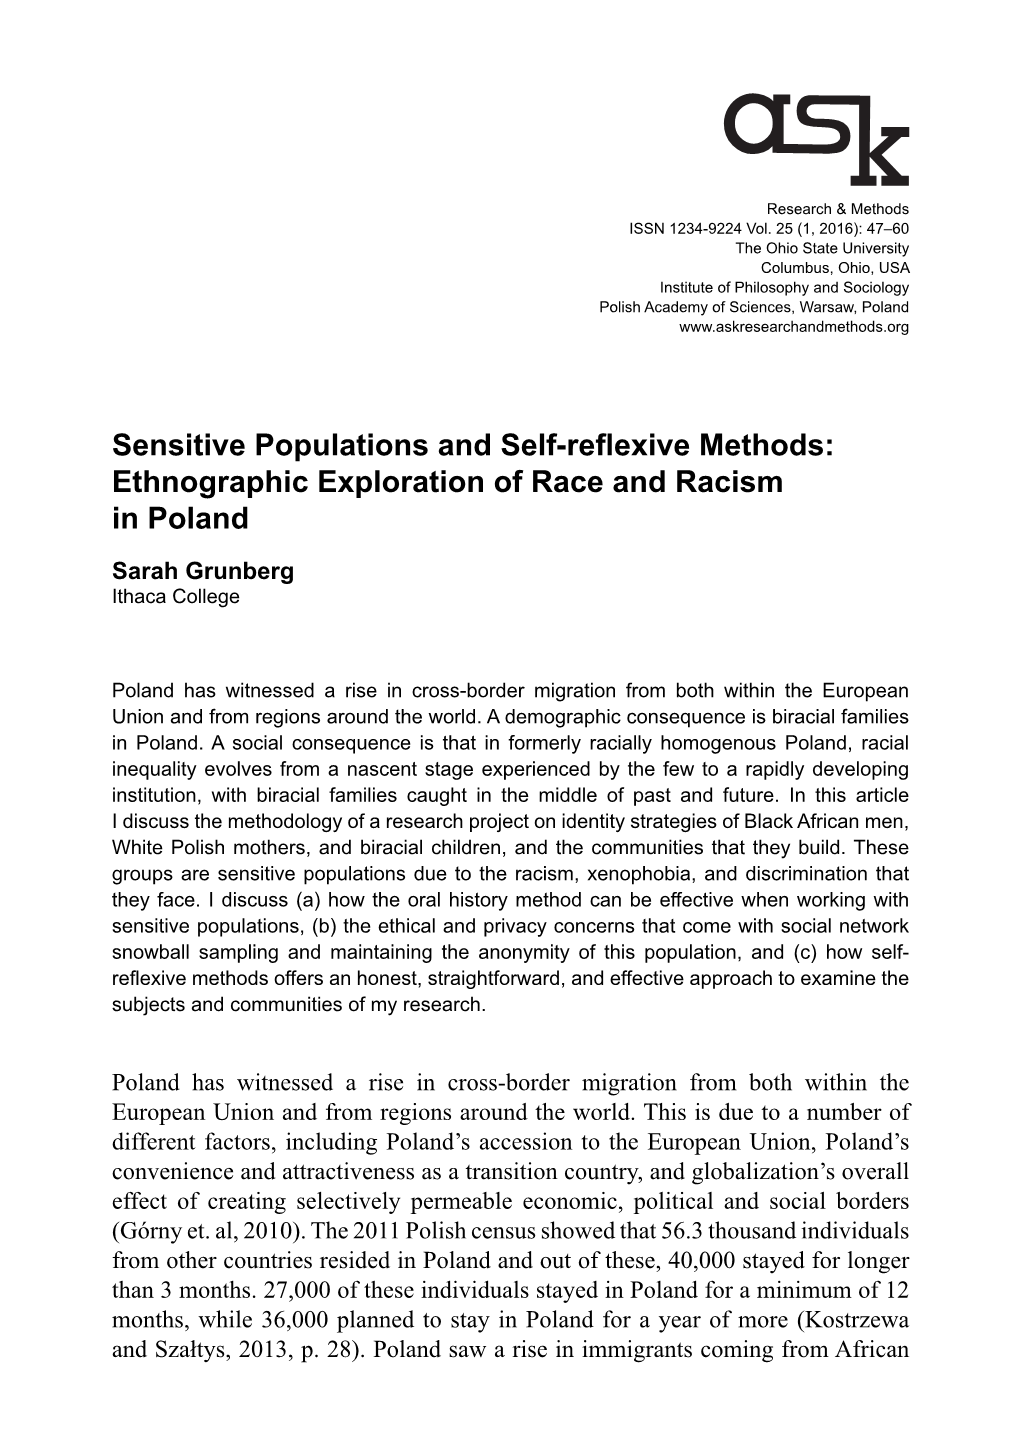 Ethnographic Exploration of Race and Racism in Poland